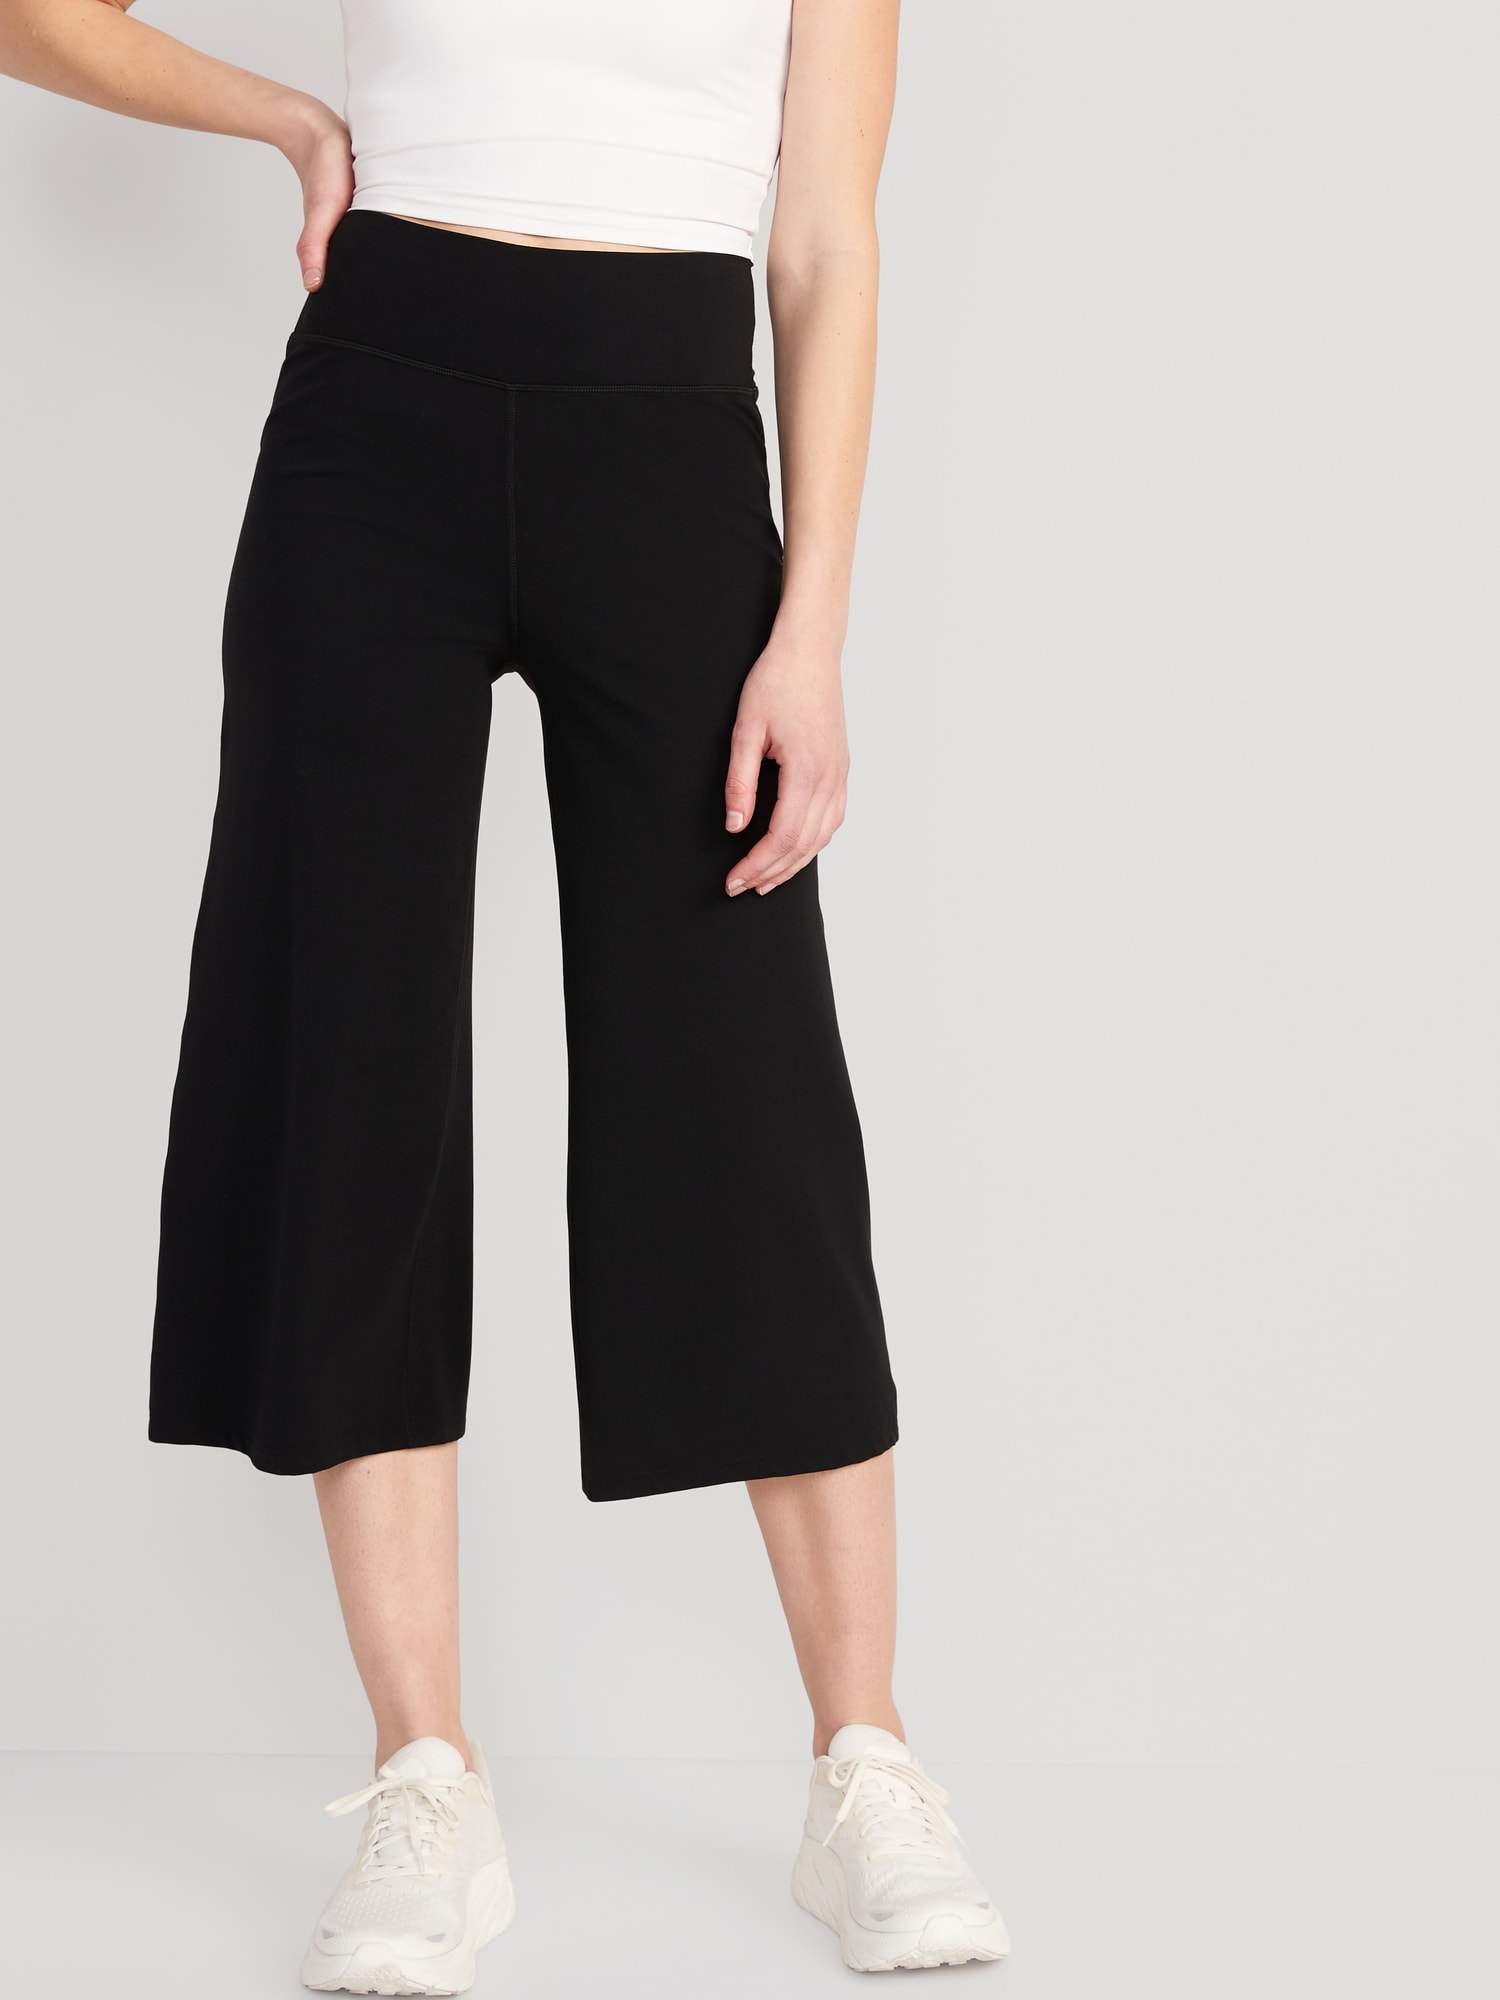 Old Navy Extra High-Waisted PowerLite Lycra° ADAPTIV Cropped Hybrid Pants for Women black. 1